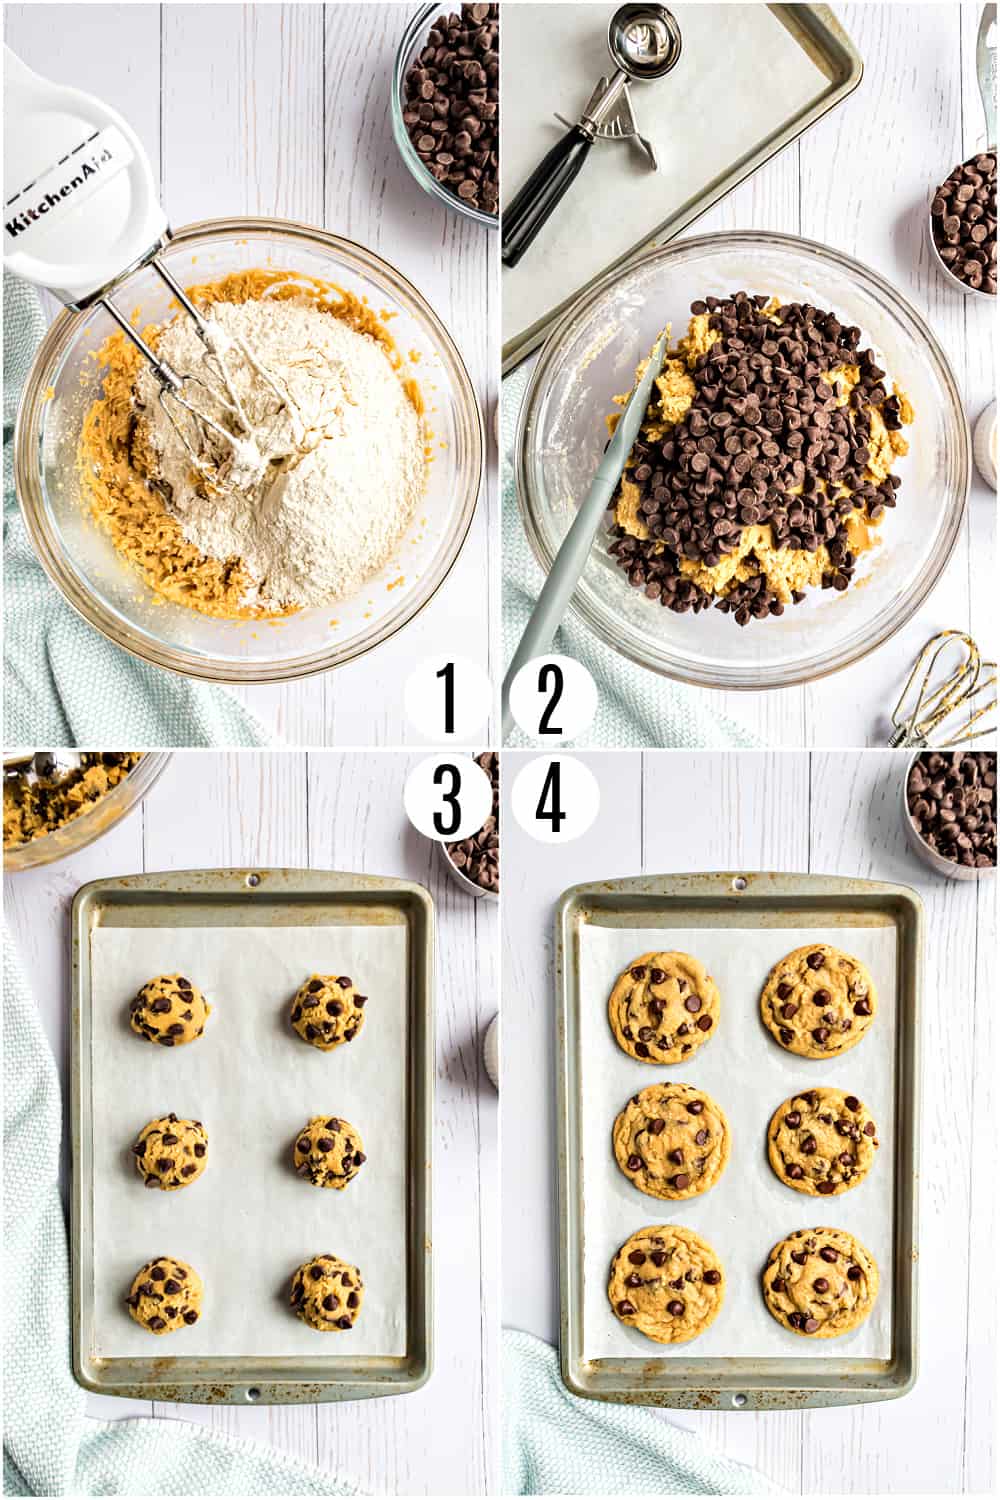 Step by step photo showing how to make chocolate chip cookies.